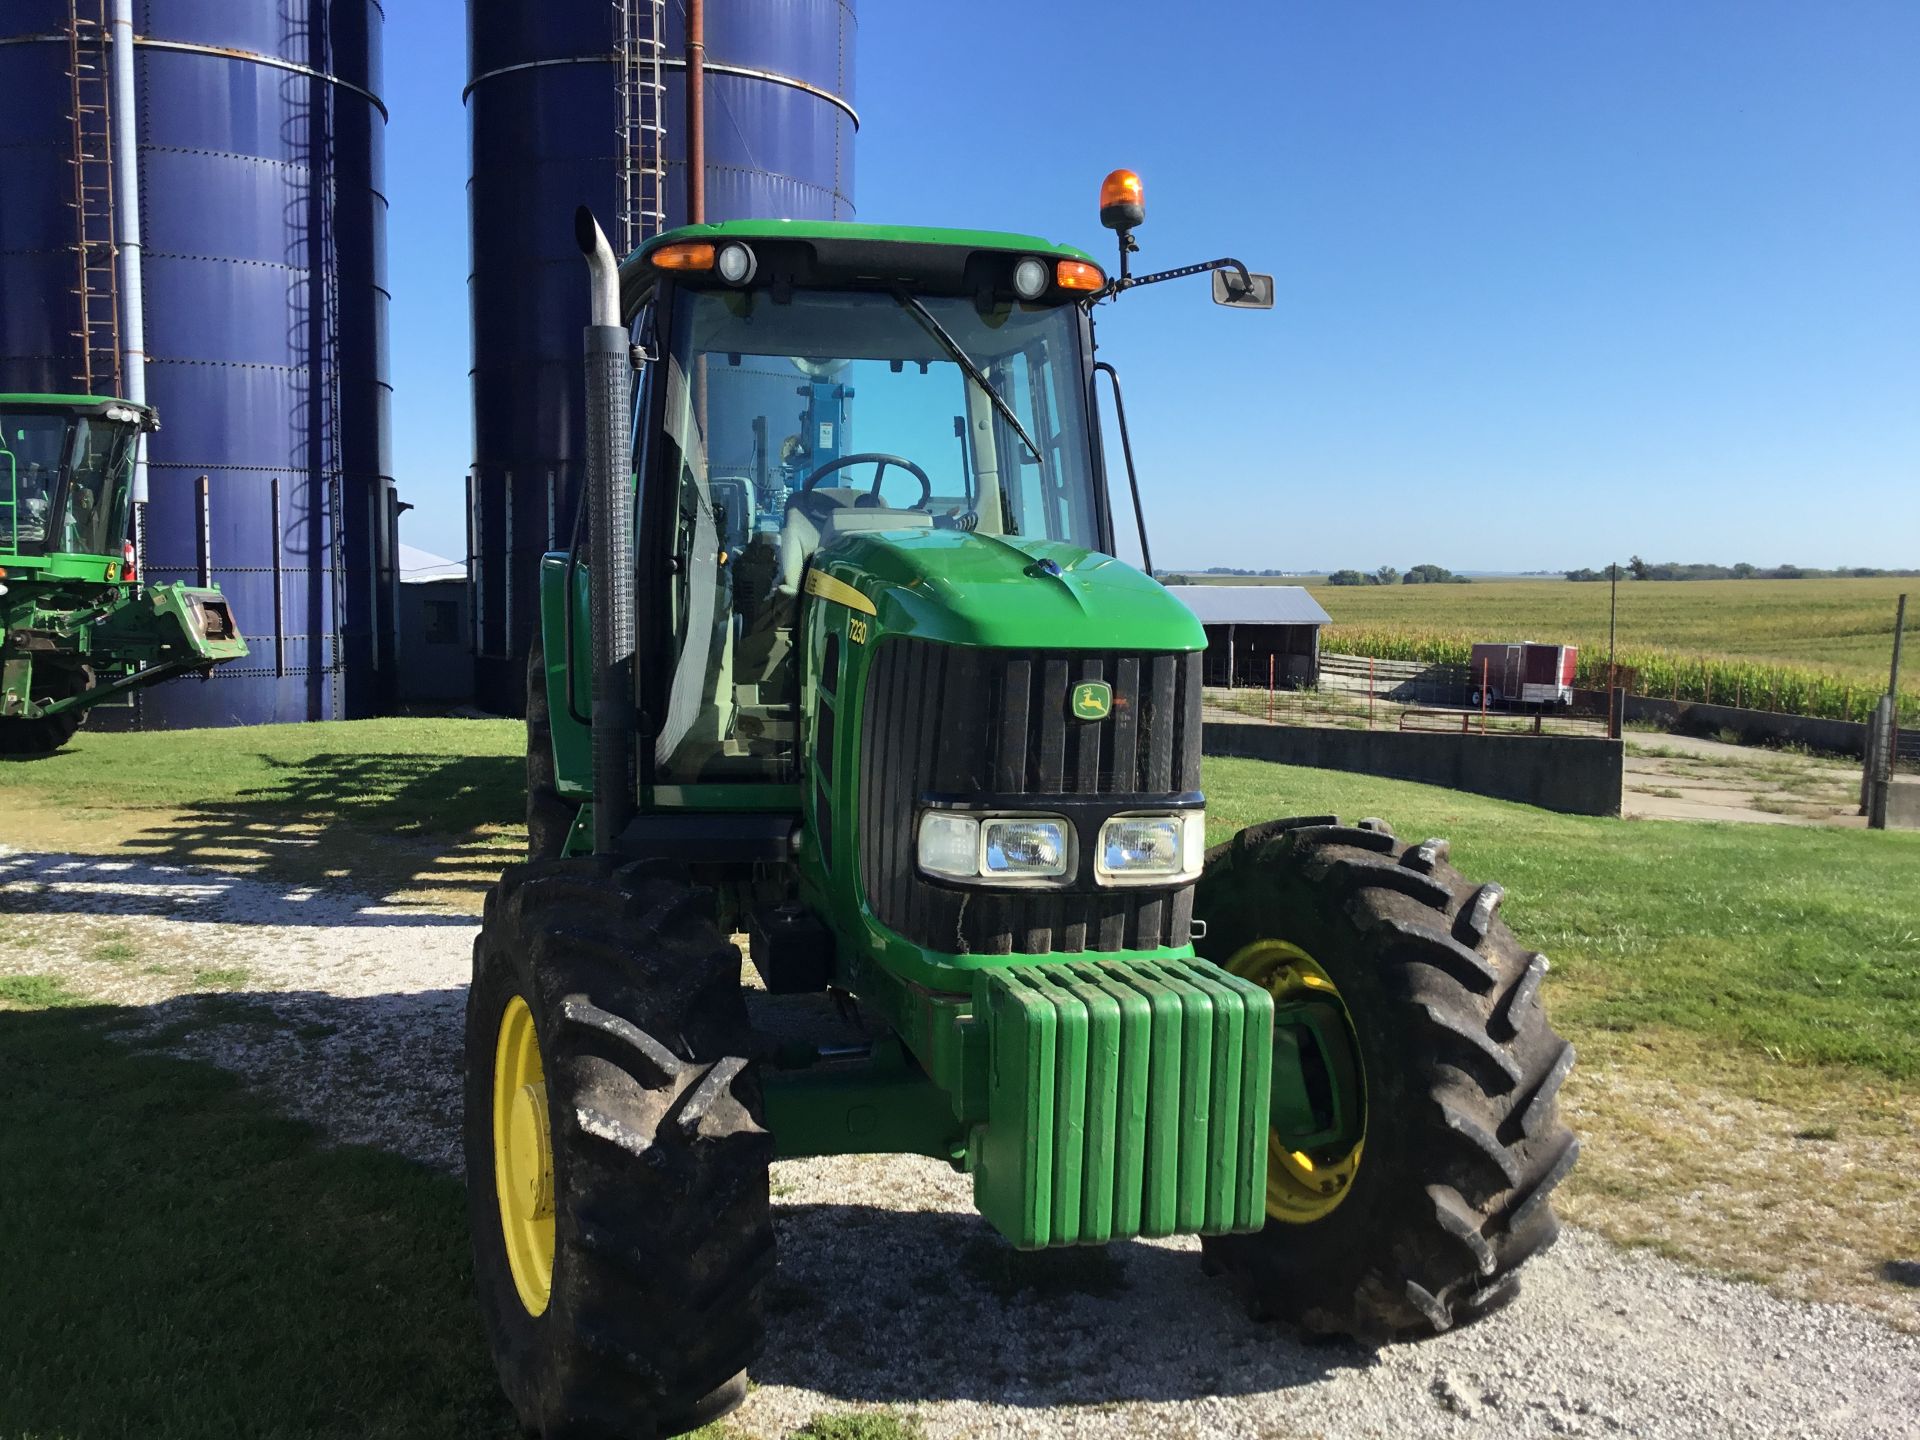 2009 JD 7230 MFWD, 24 Speed Trans, 3 Hyd. Remotes, 1000 PTO, 8 Front Wts., 460/85R38 Rear Tires, - Image 15 of 16